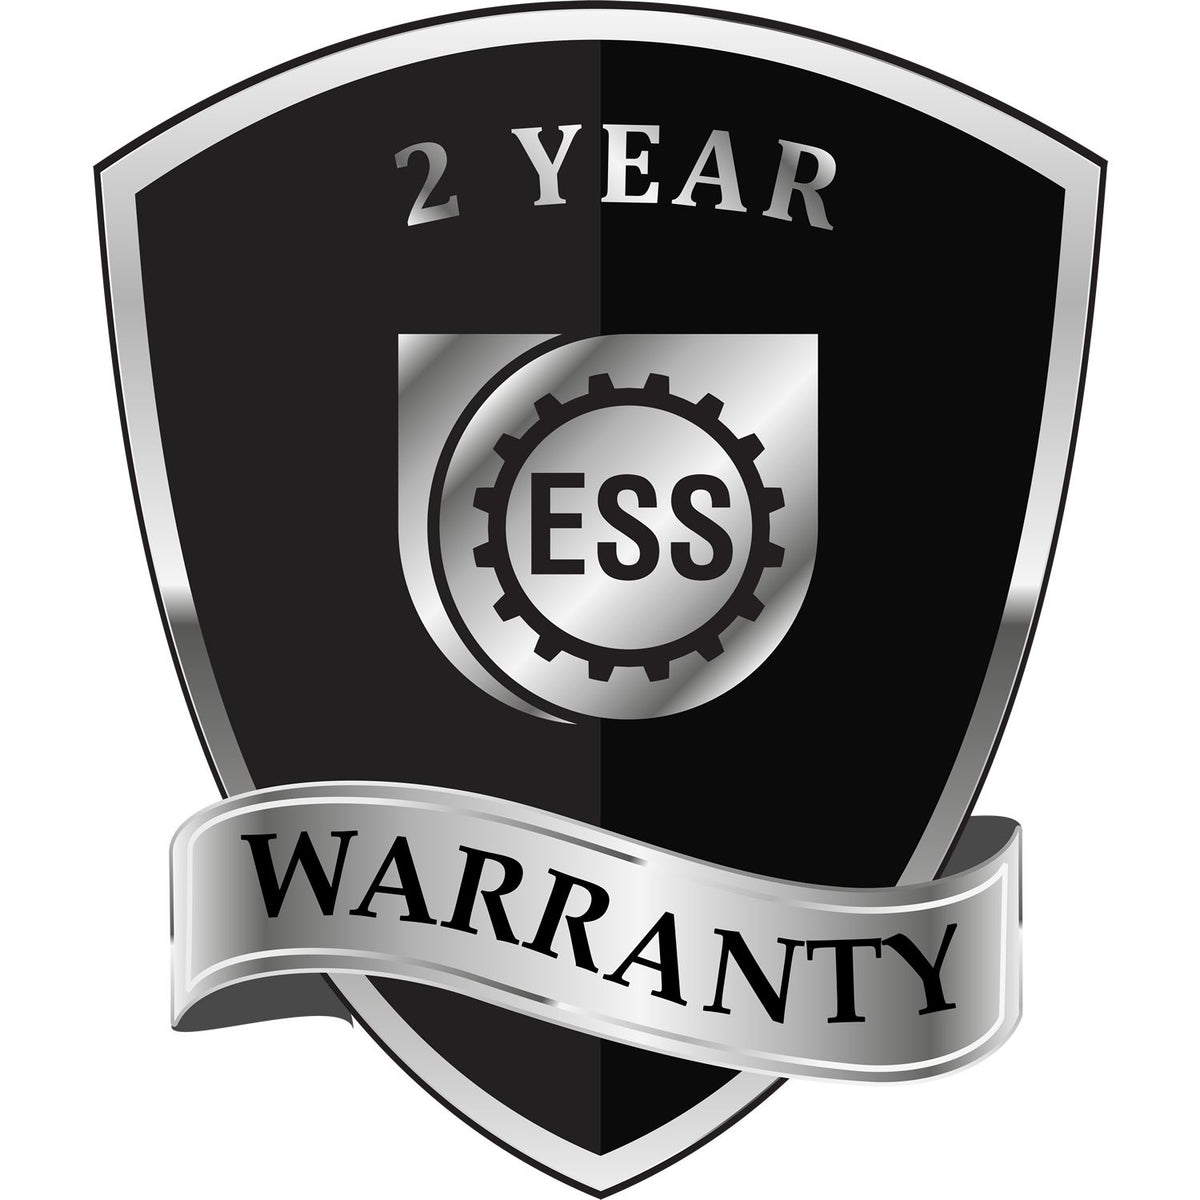 A badge or emblem showing a warranty icon for the New York Engineer Desk Seal